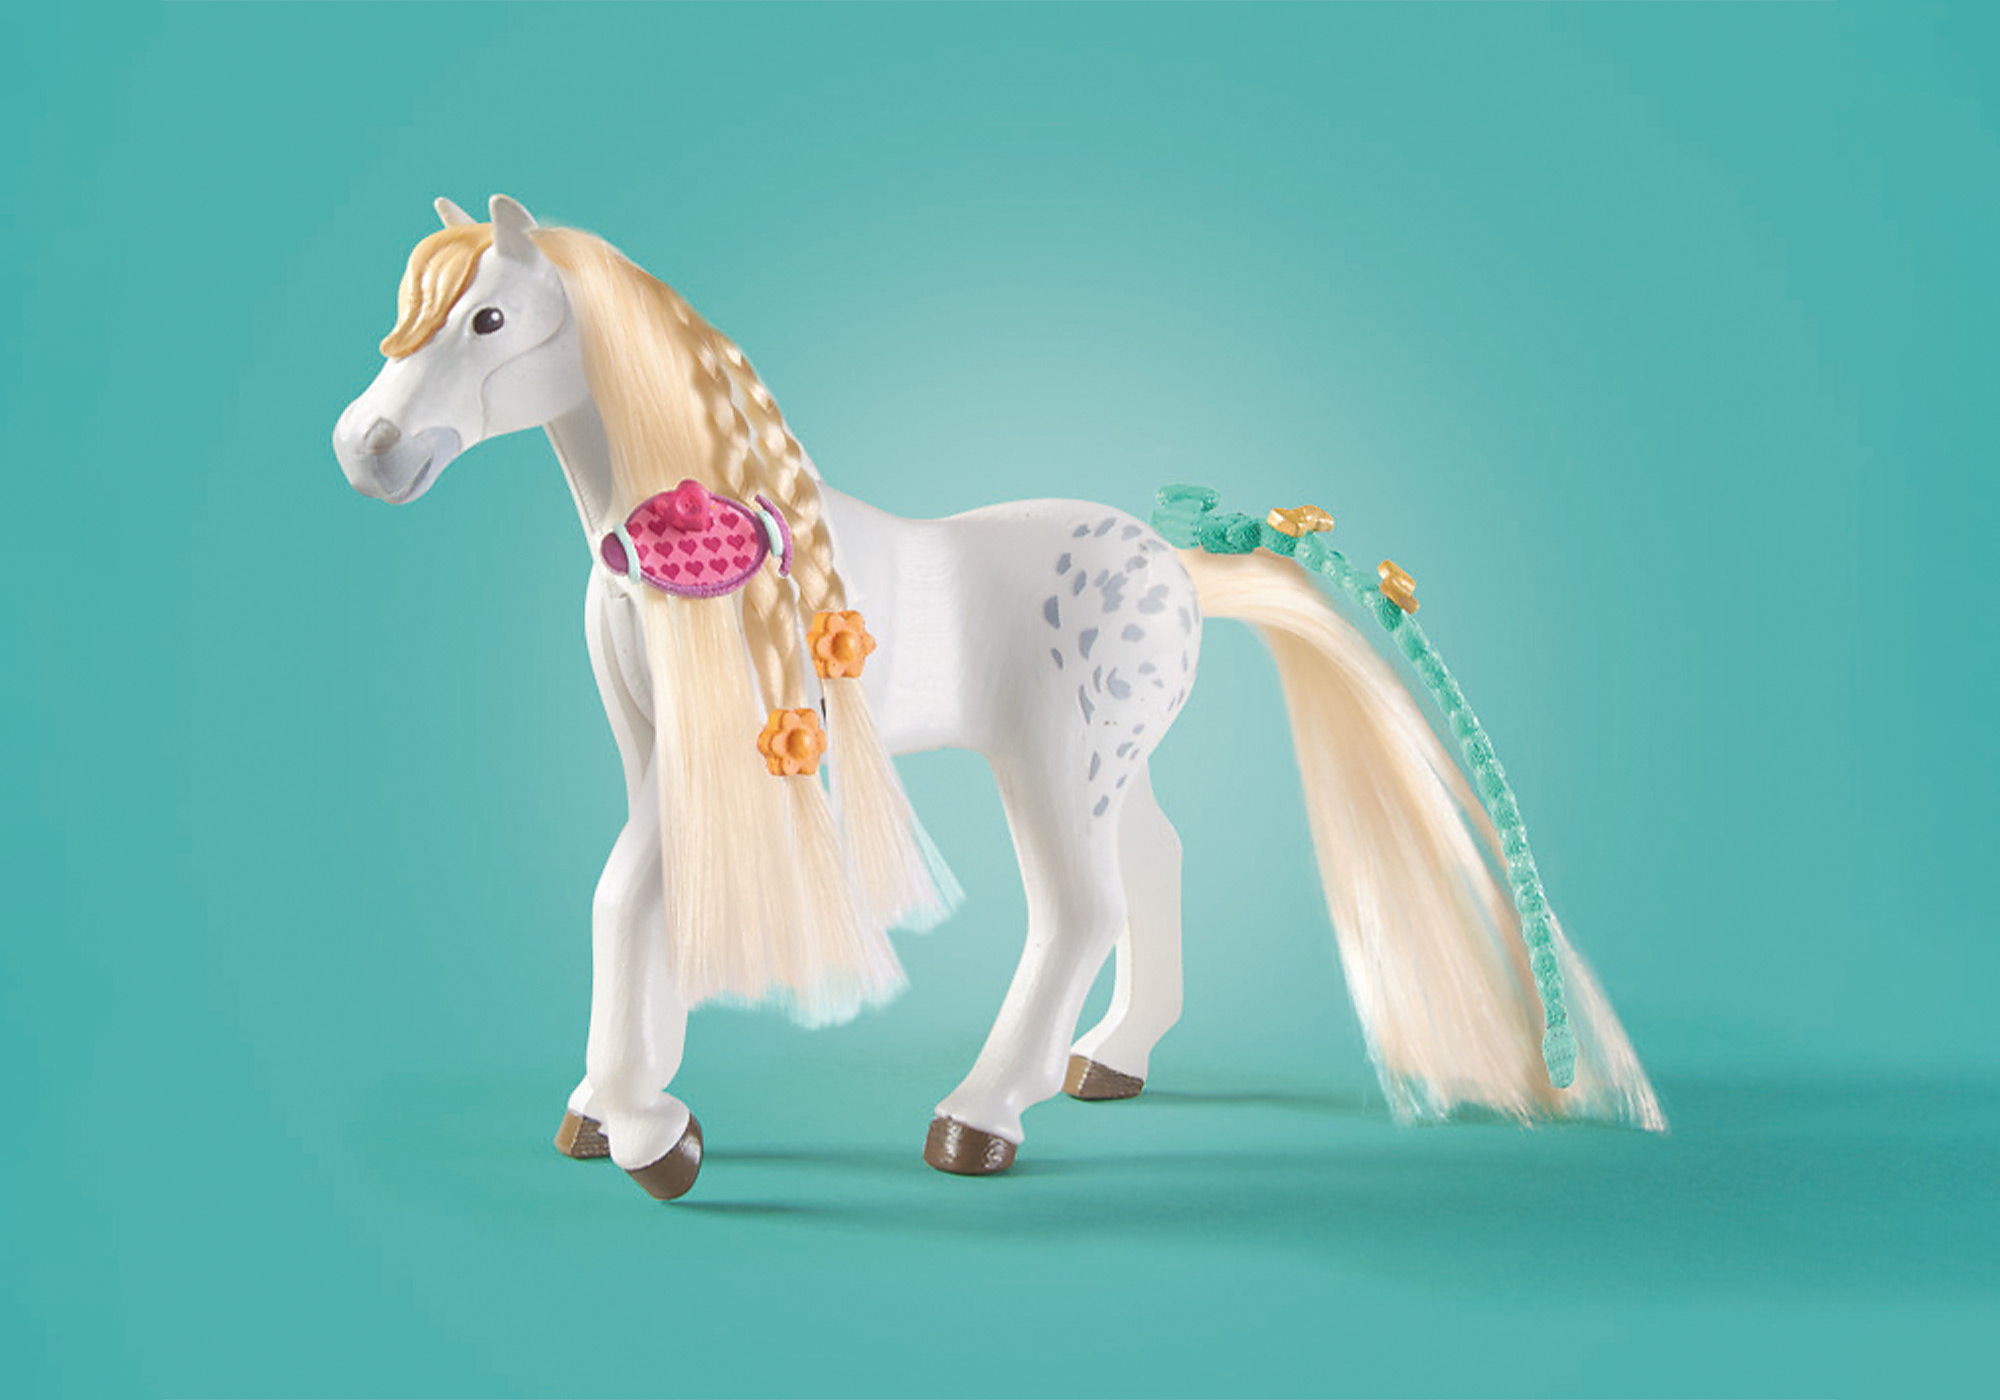 Isabella et Lioness aire de lavage Playmobil Horses of Waterfall